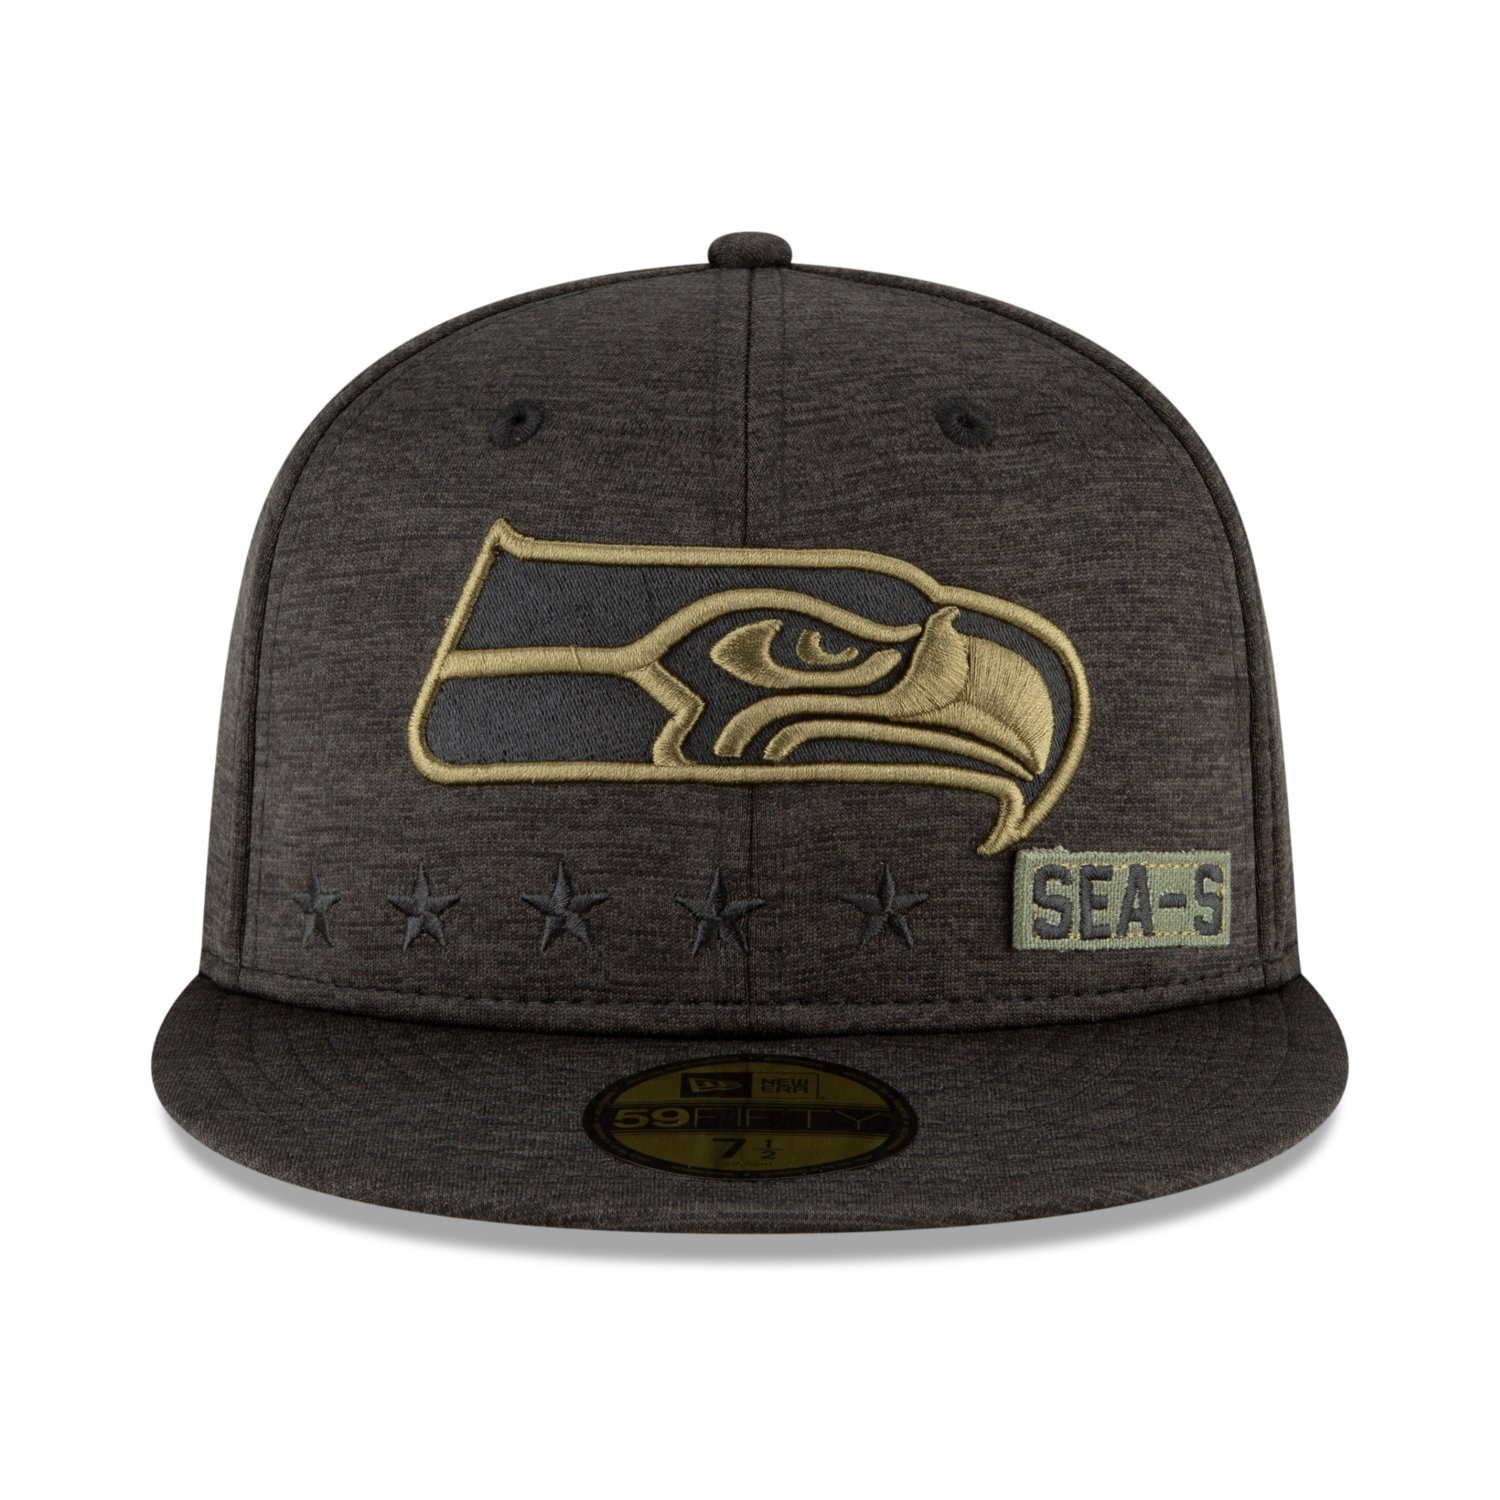 Service to New 2020 Seahawks Era Fitted Seattle Cap 59FIFTY Salute NFL